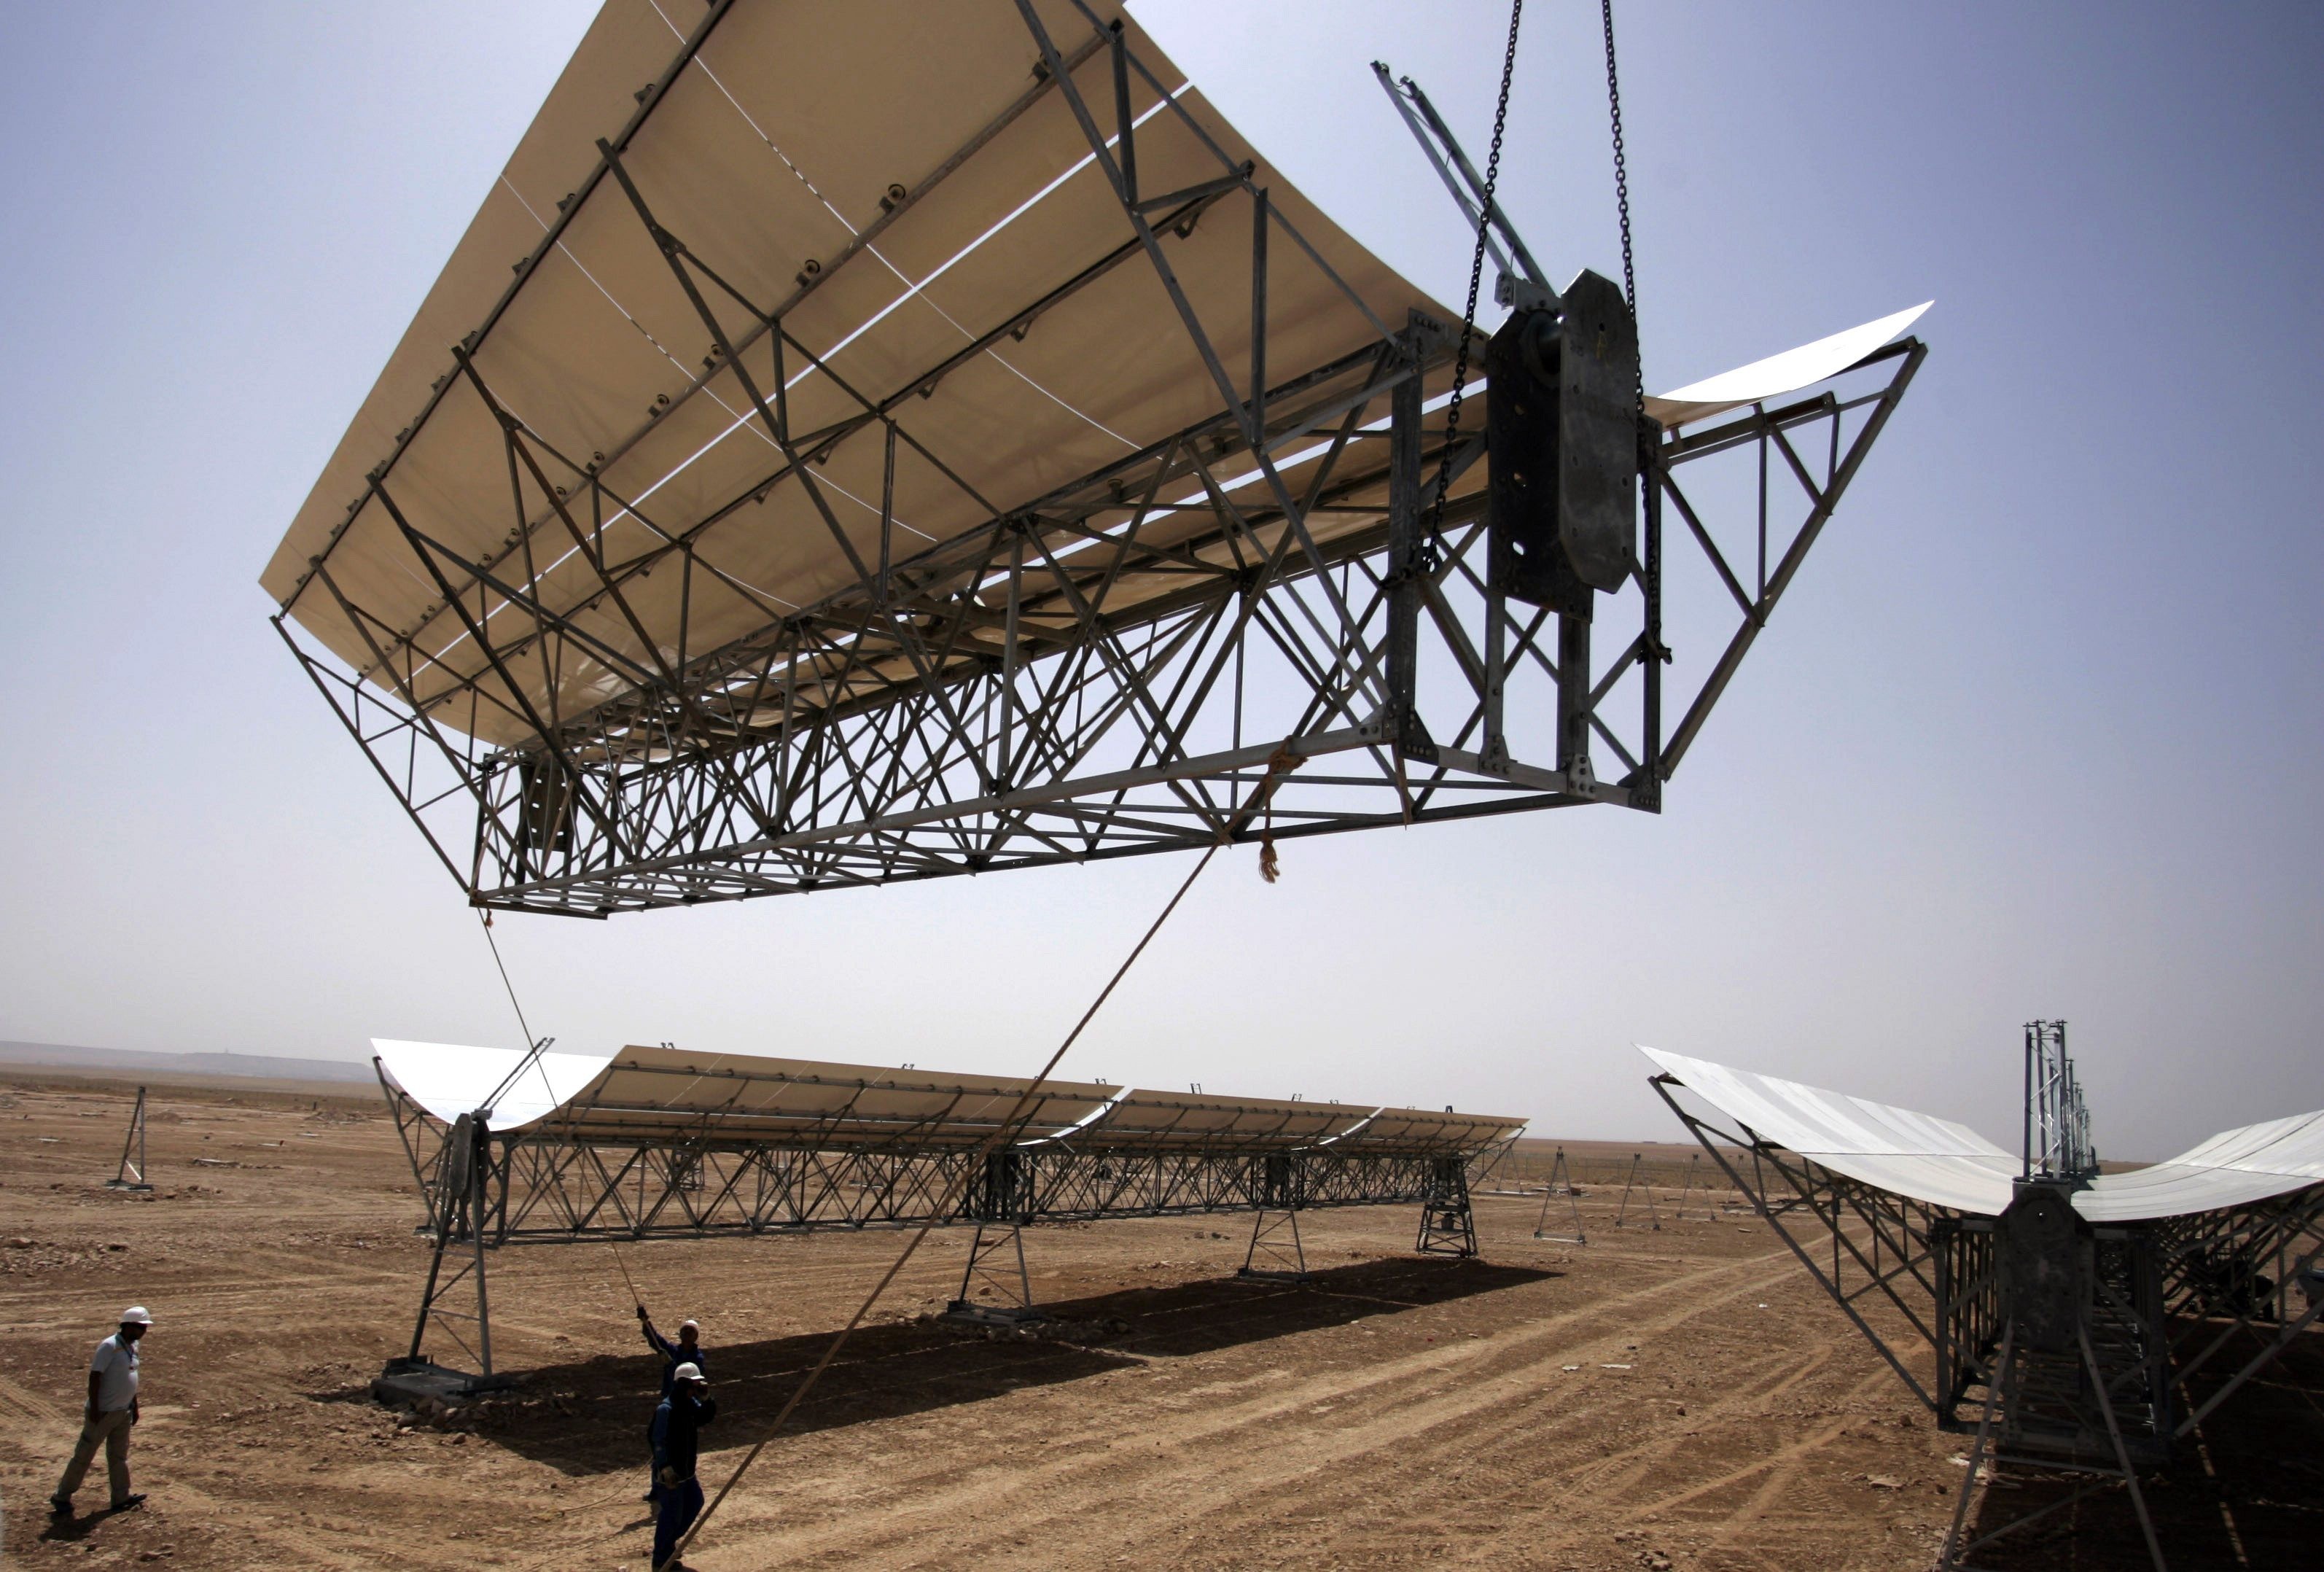 Workers build a thermo-solar power plant in Beni Mathar, Morocco. Morocco has earned praise for its commitment to using renewables, getting nearly 30 per cent of its energy from such sources. Photo: Reuters